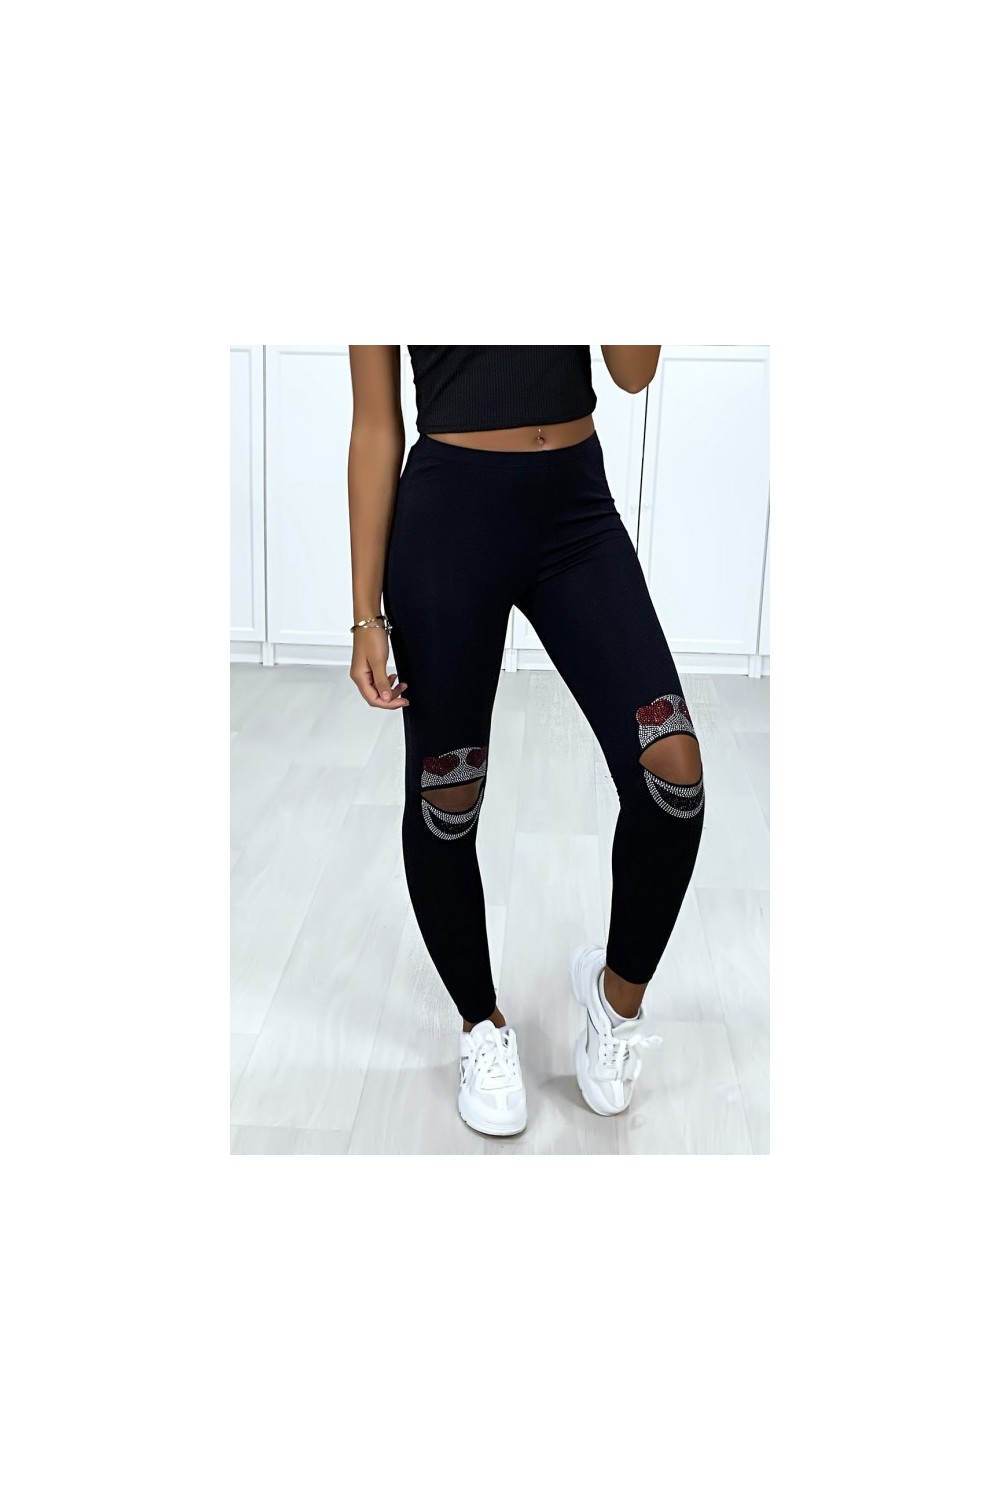 Women's black cotton leggings with openings and rhinestones at the knees. -  SARL G2TO